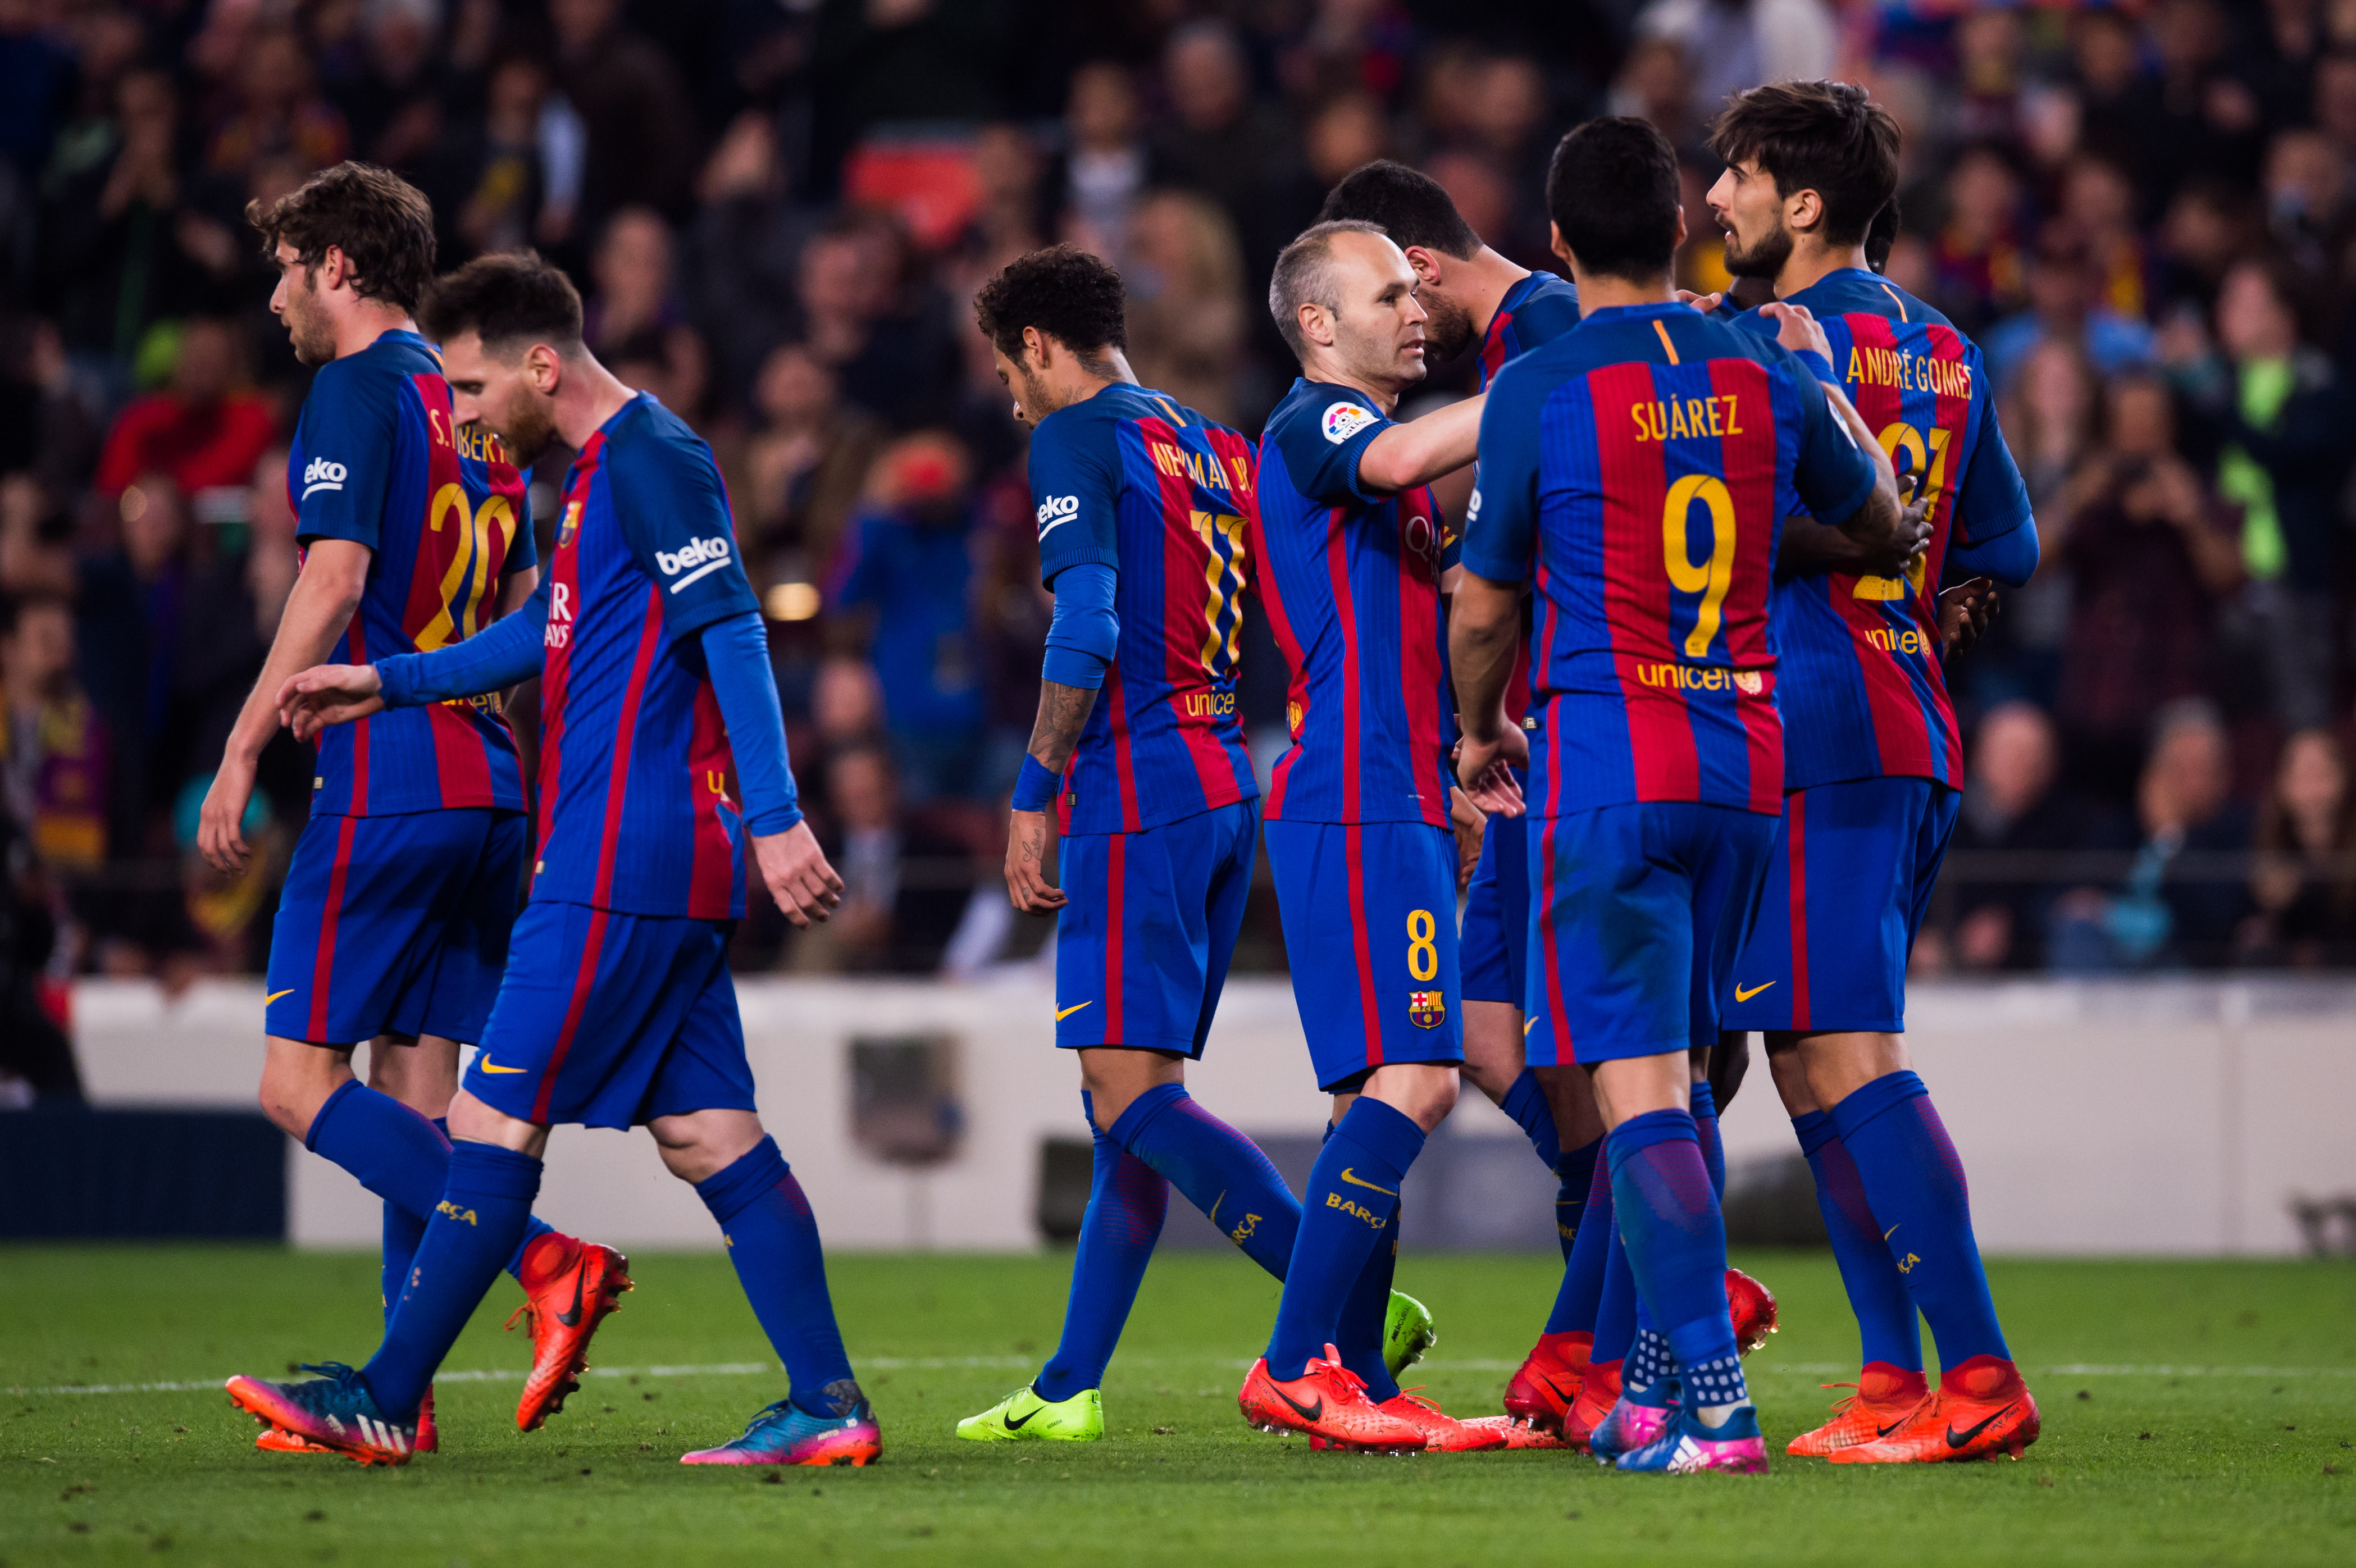 BARCELONA, SPAIN - MARCH 19: Andre Gomes (R) of FC Barcelona celebrates with his teammates Sergi Roberto, Lionel Messi, Neymar Santos Jr, Andres Iniesta and Luis Suarez (L-R) during the La Liga match between FC Barcelona and Valencia CF at Camp Nou stadium on March 19, 2017 in Barcelona, Spain. (Photo by Alex Caparros/Getty Images)